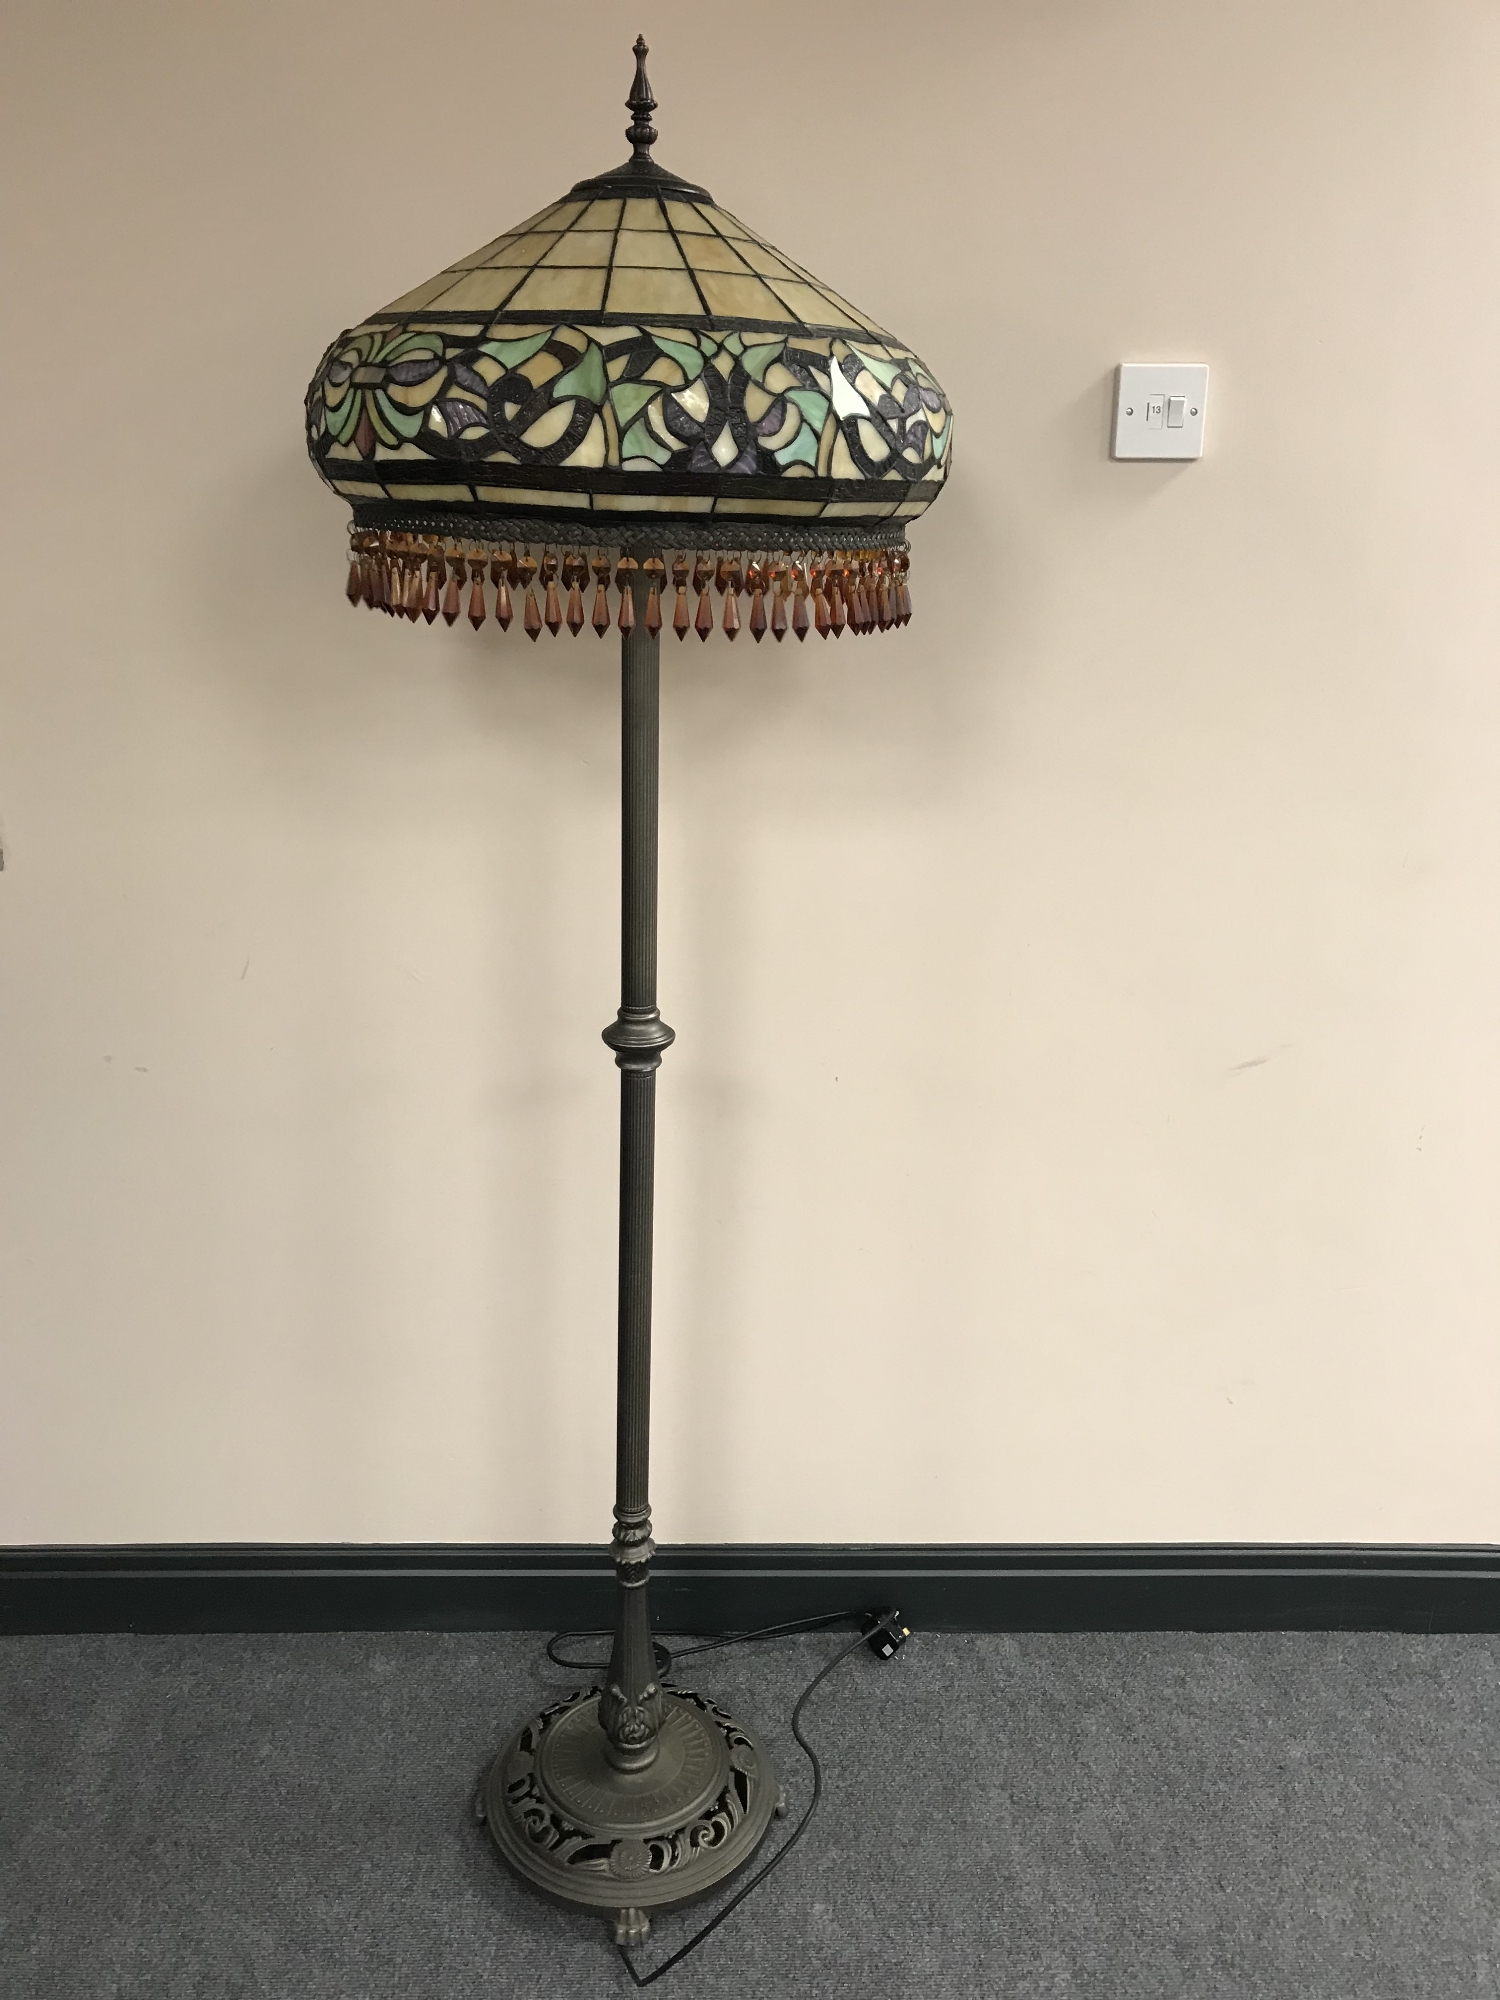 A Tiffany style floor lamp with shade